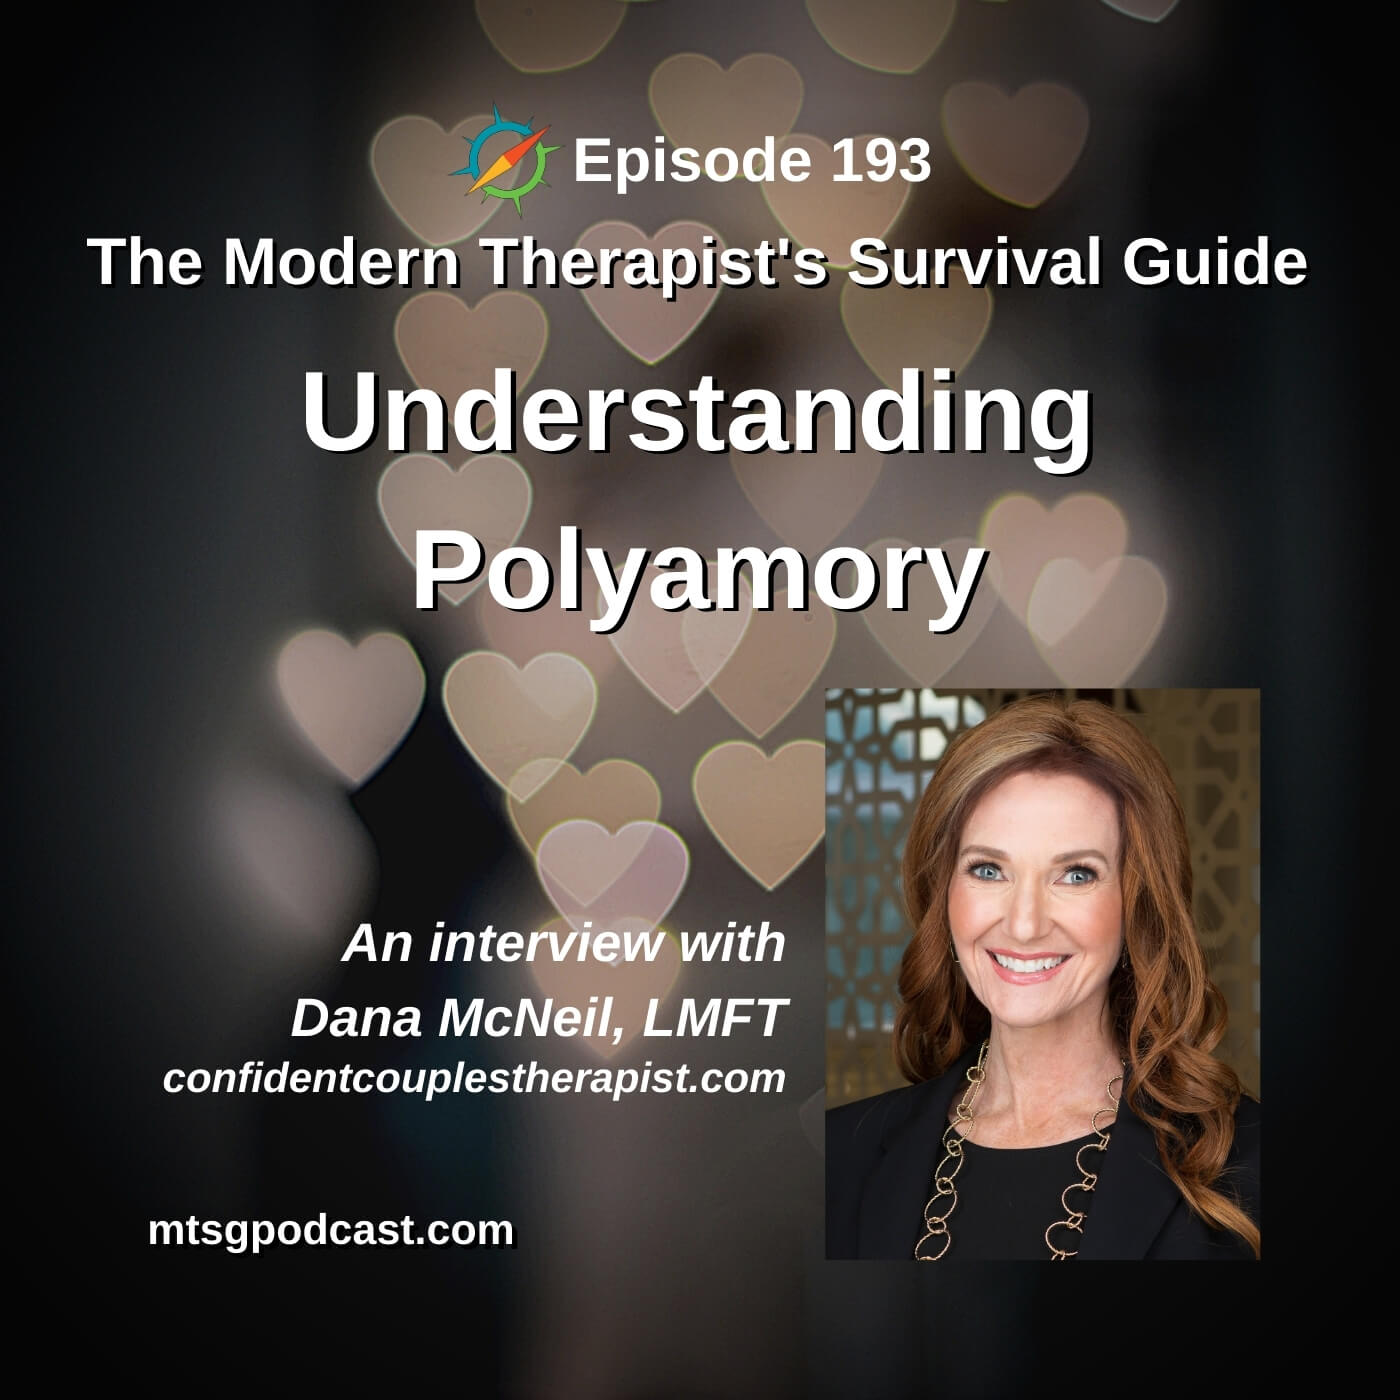 Understanding Polyamory An Interview with Dana McNeil, LMFT